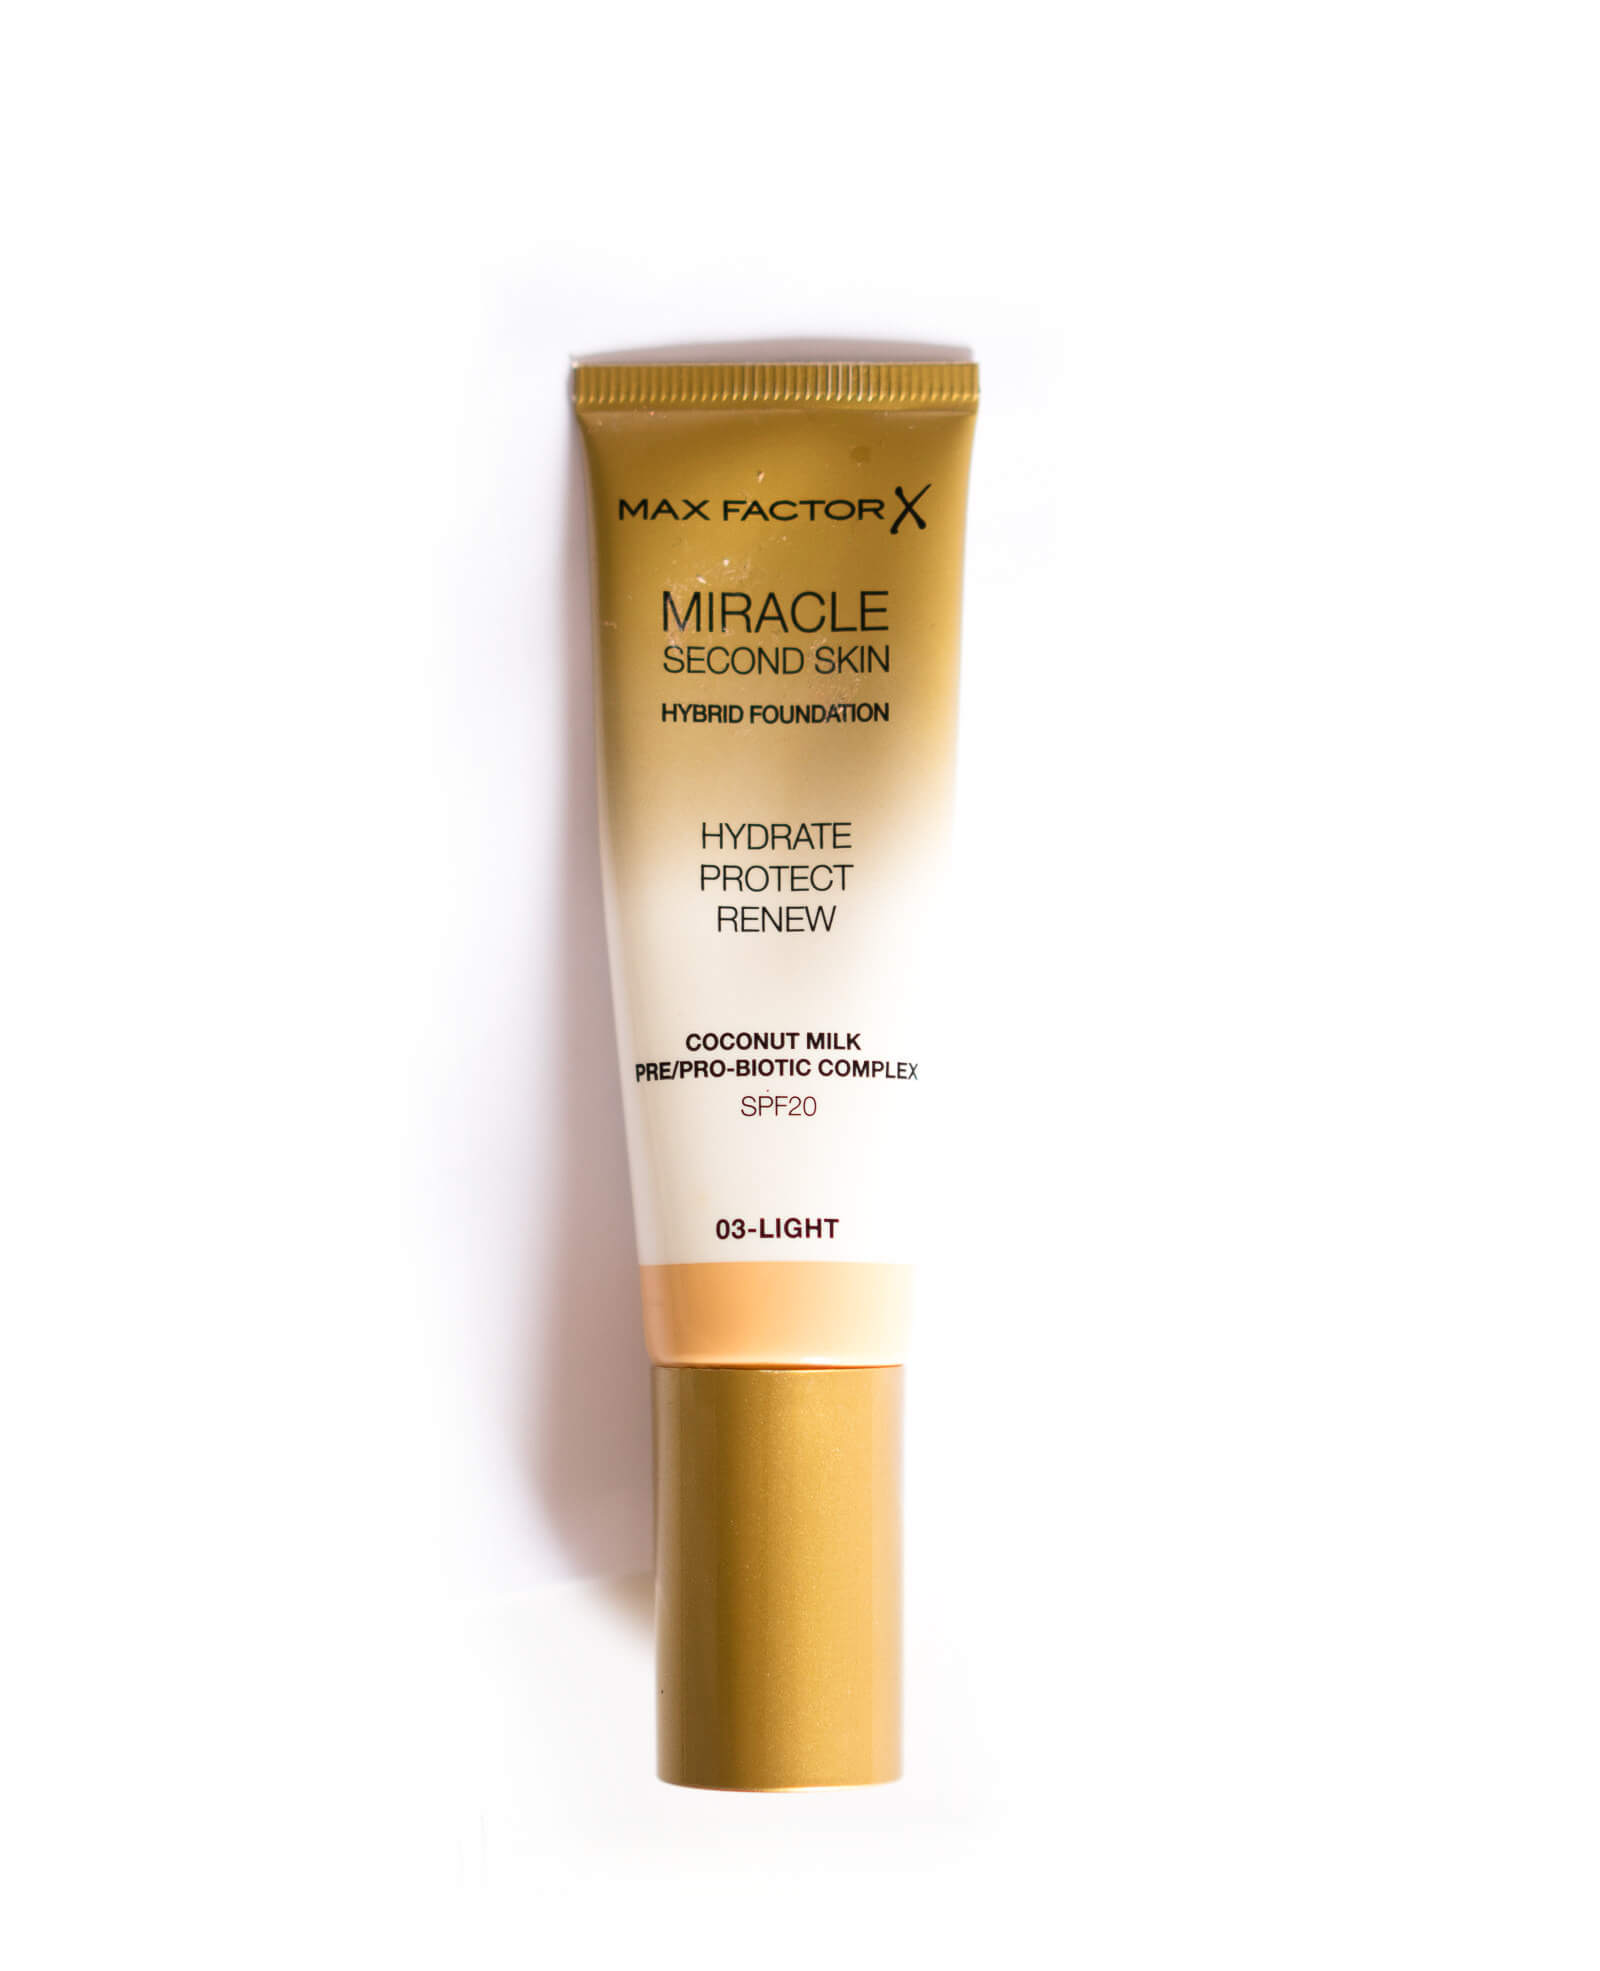 Review - Max Factor Miracle Second Skin Foundation im Test 1